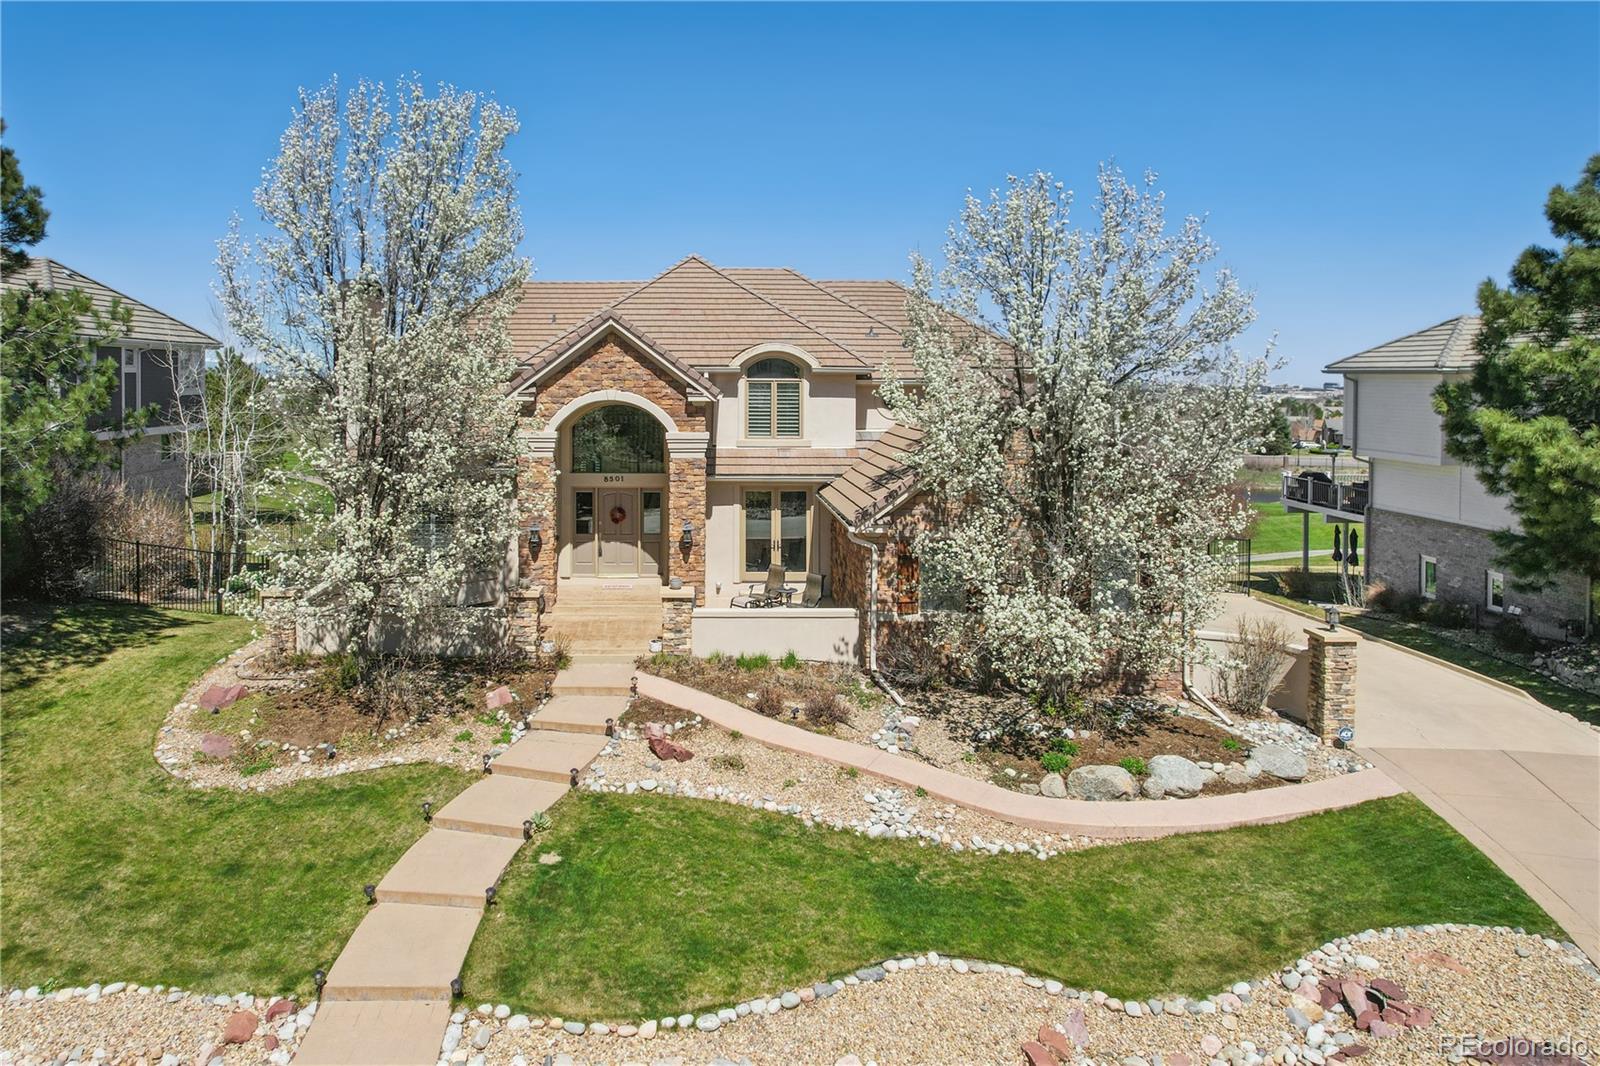 8501  Colonial Drive, lone tree MLS: 9496729 Beds: 5 Baths: 5 Price: $1,650,000